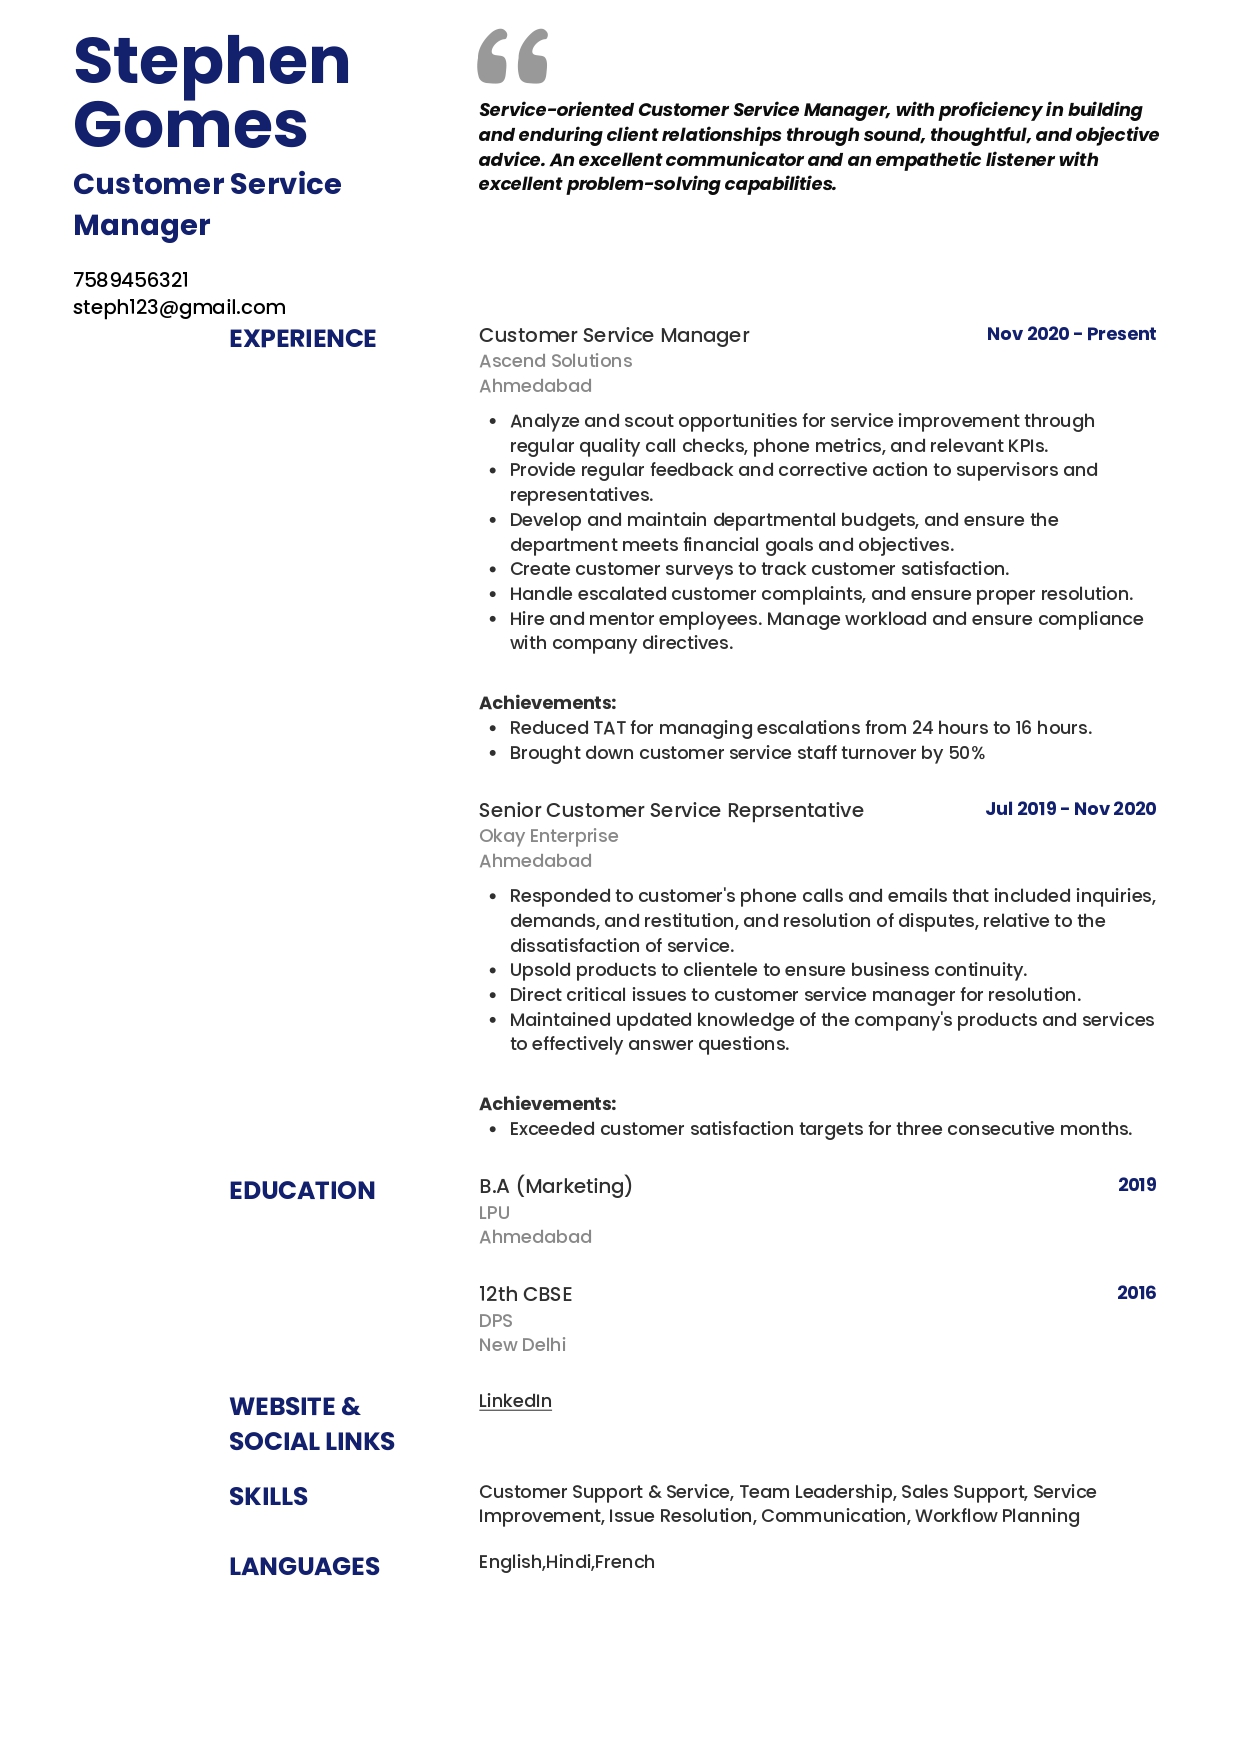 Resume of Customer Service Manager